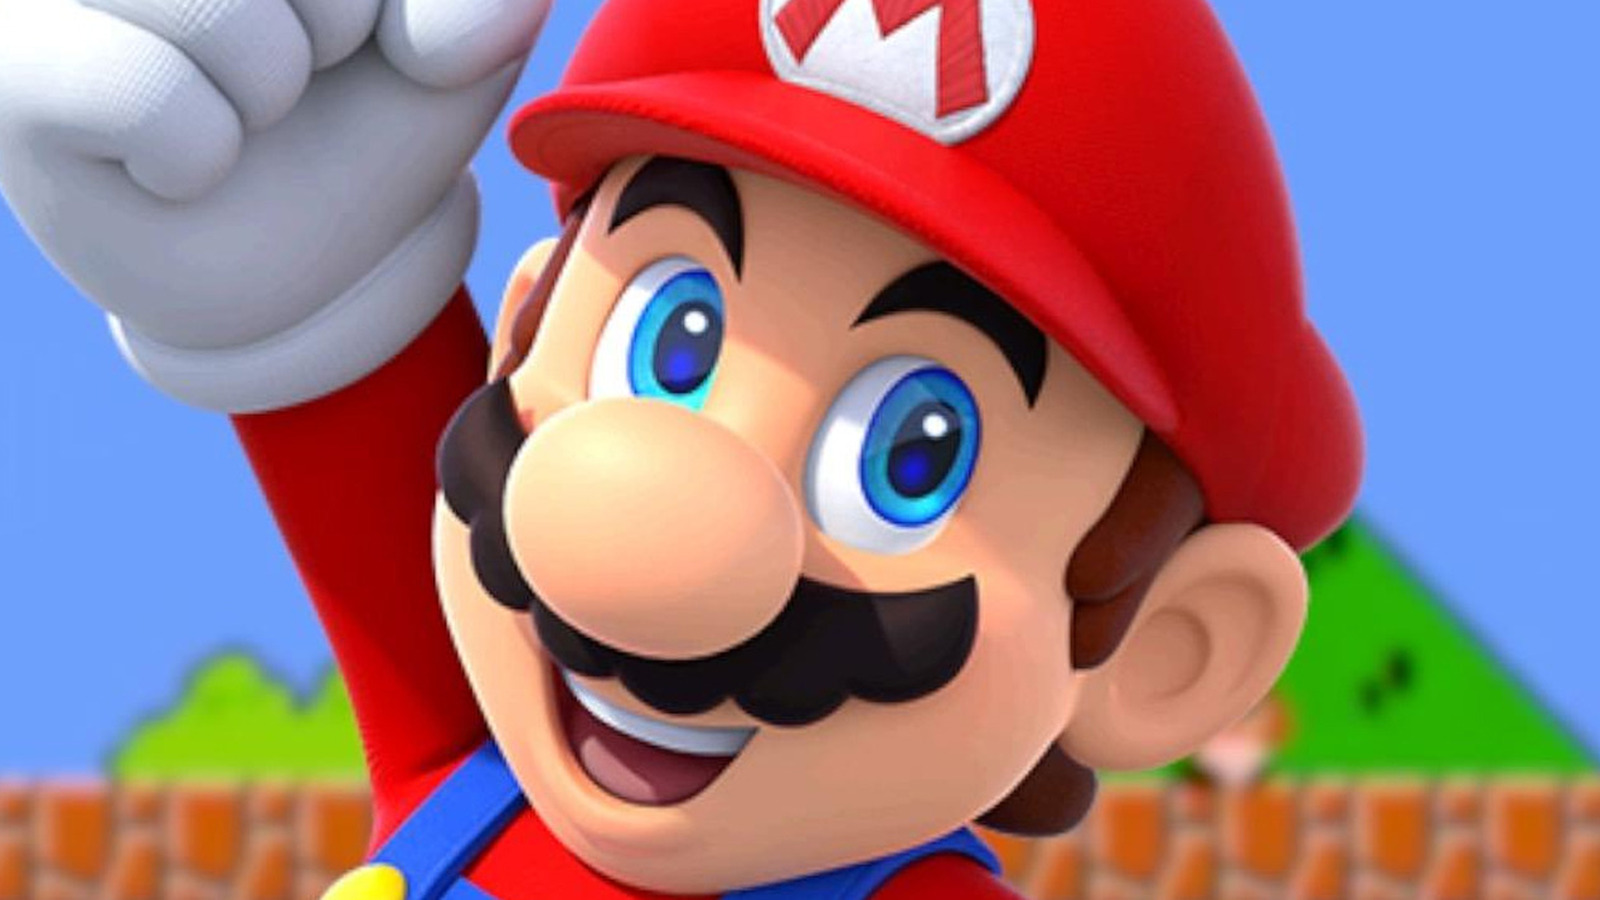 Things Fans Want To See In New Animated Super Mario Bros. Film